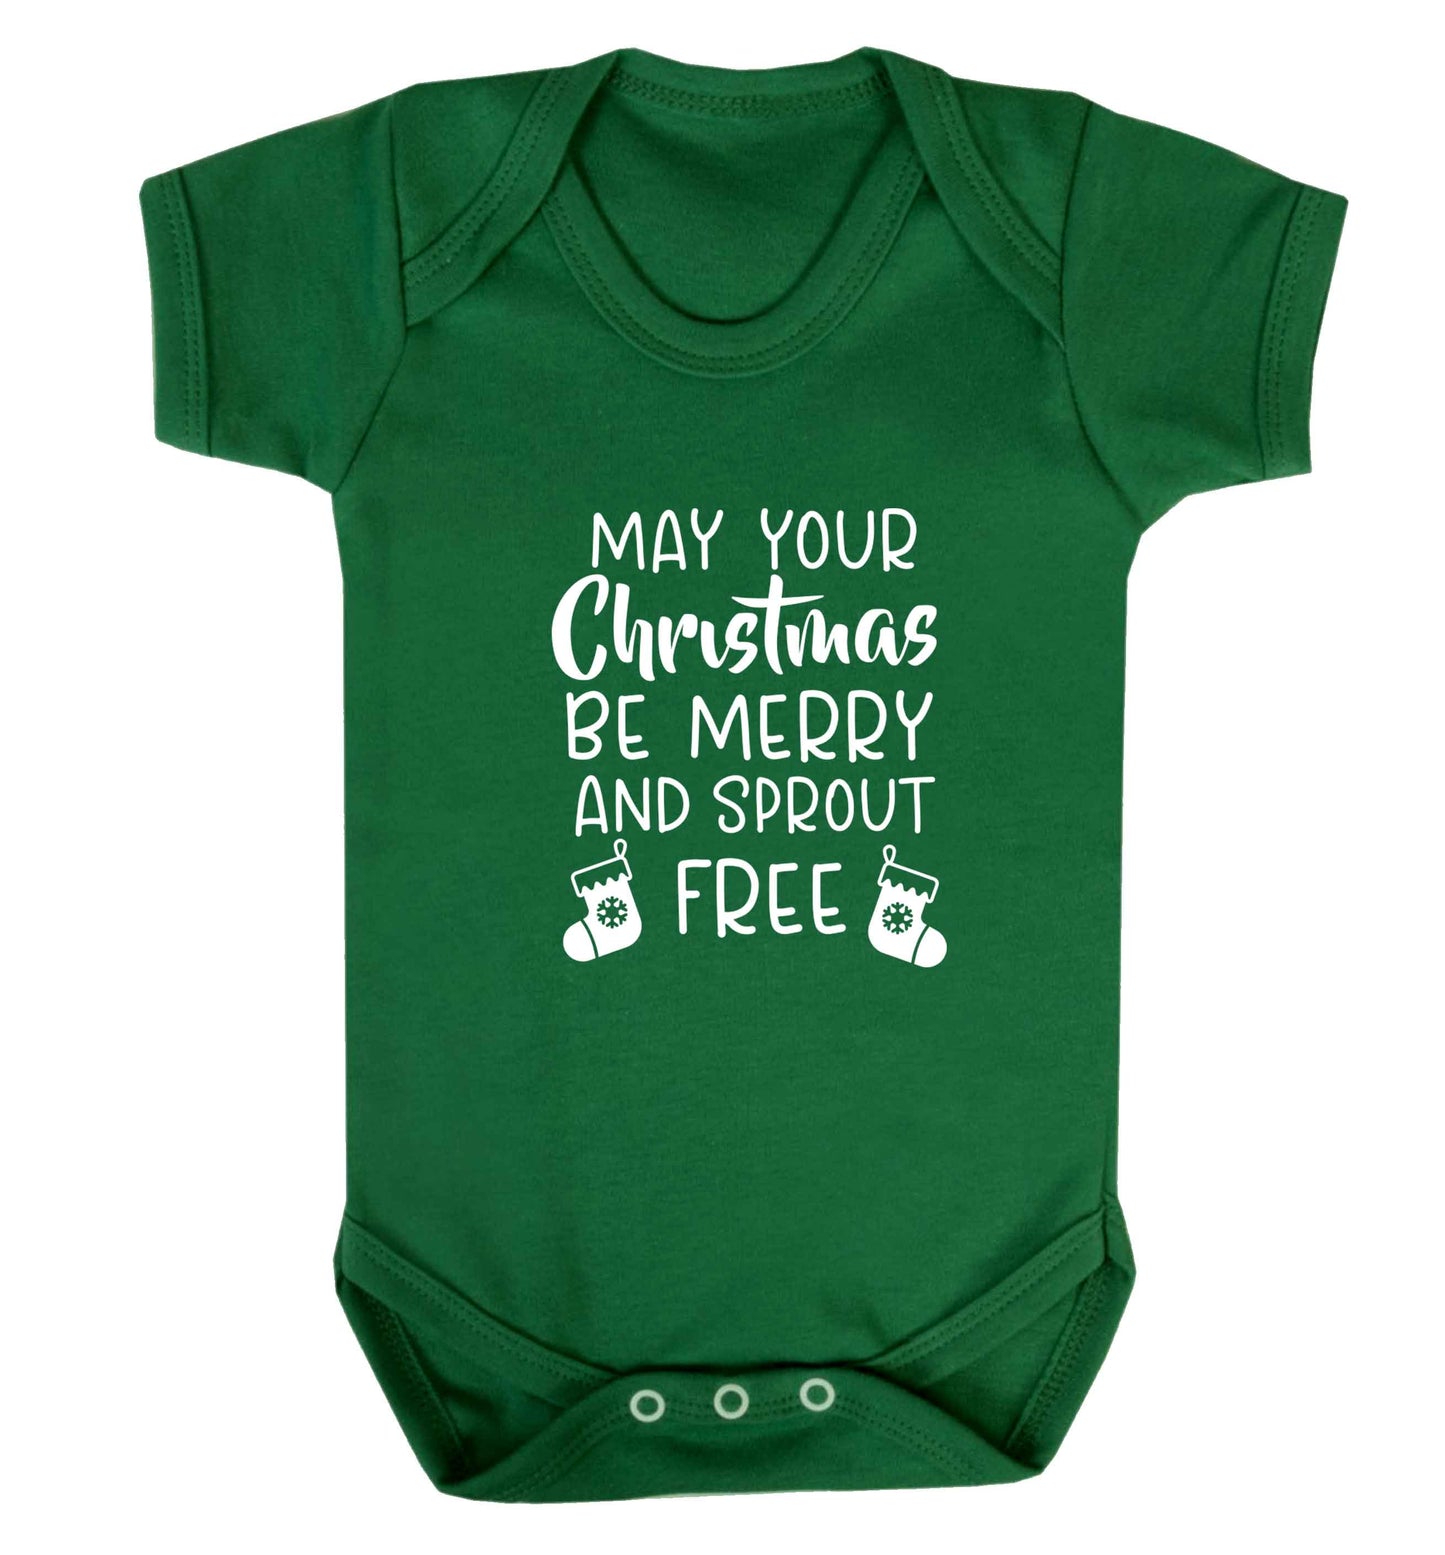 May your Christmas be merry and sprout free baby vest green 18-24 months